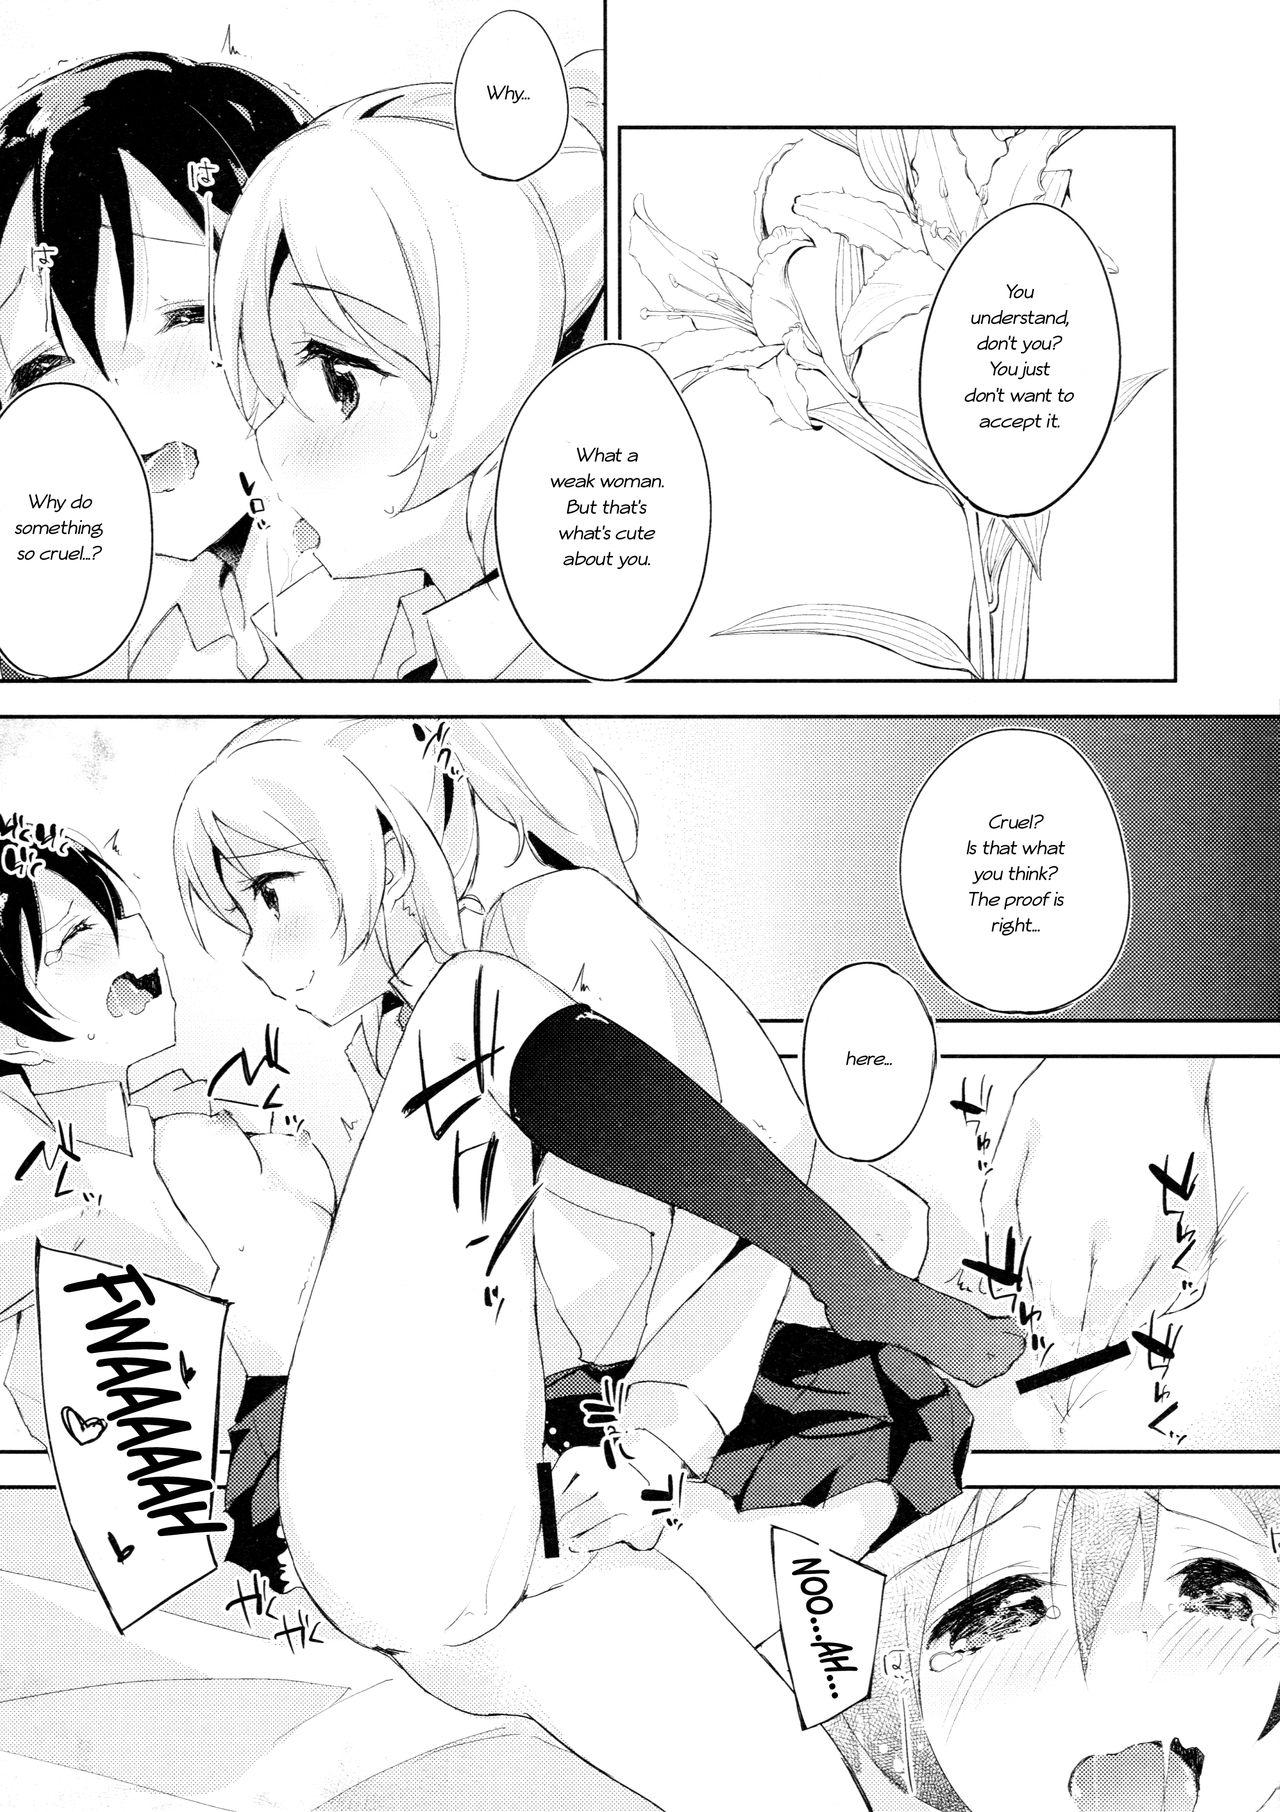 Pussylicking Desire in Lover. - Love live Suckingdick - Page 8